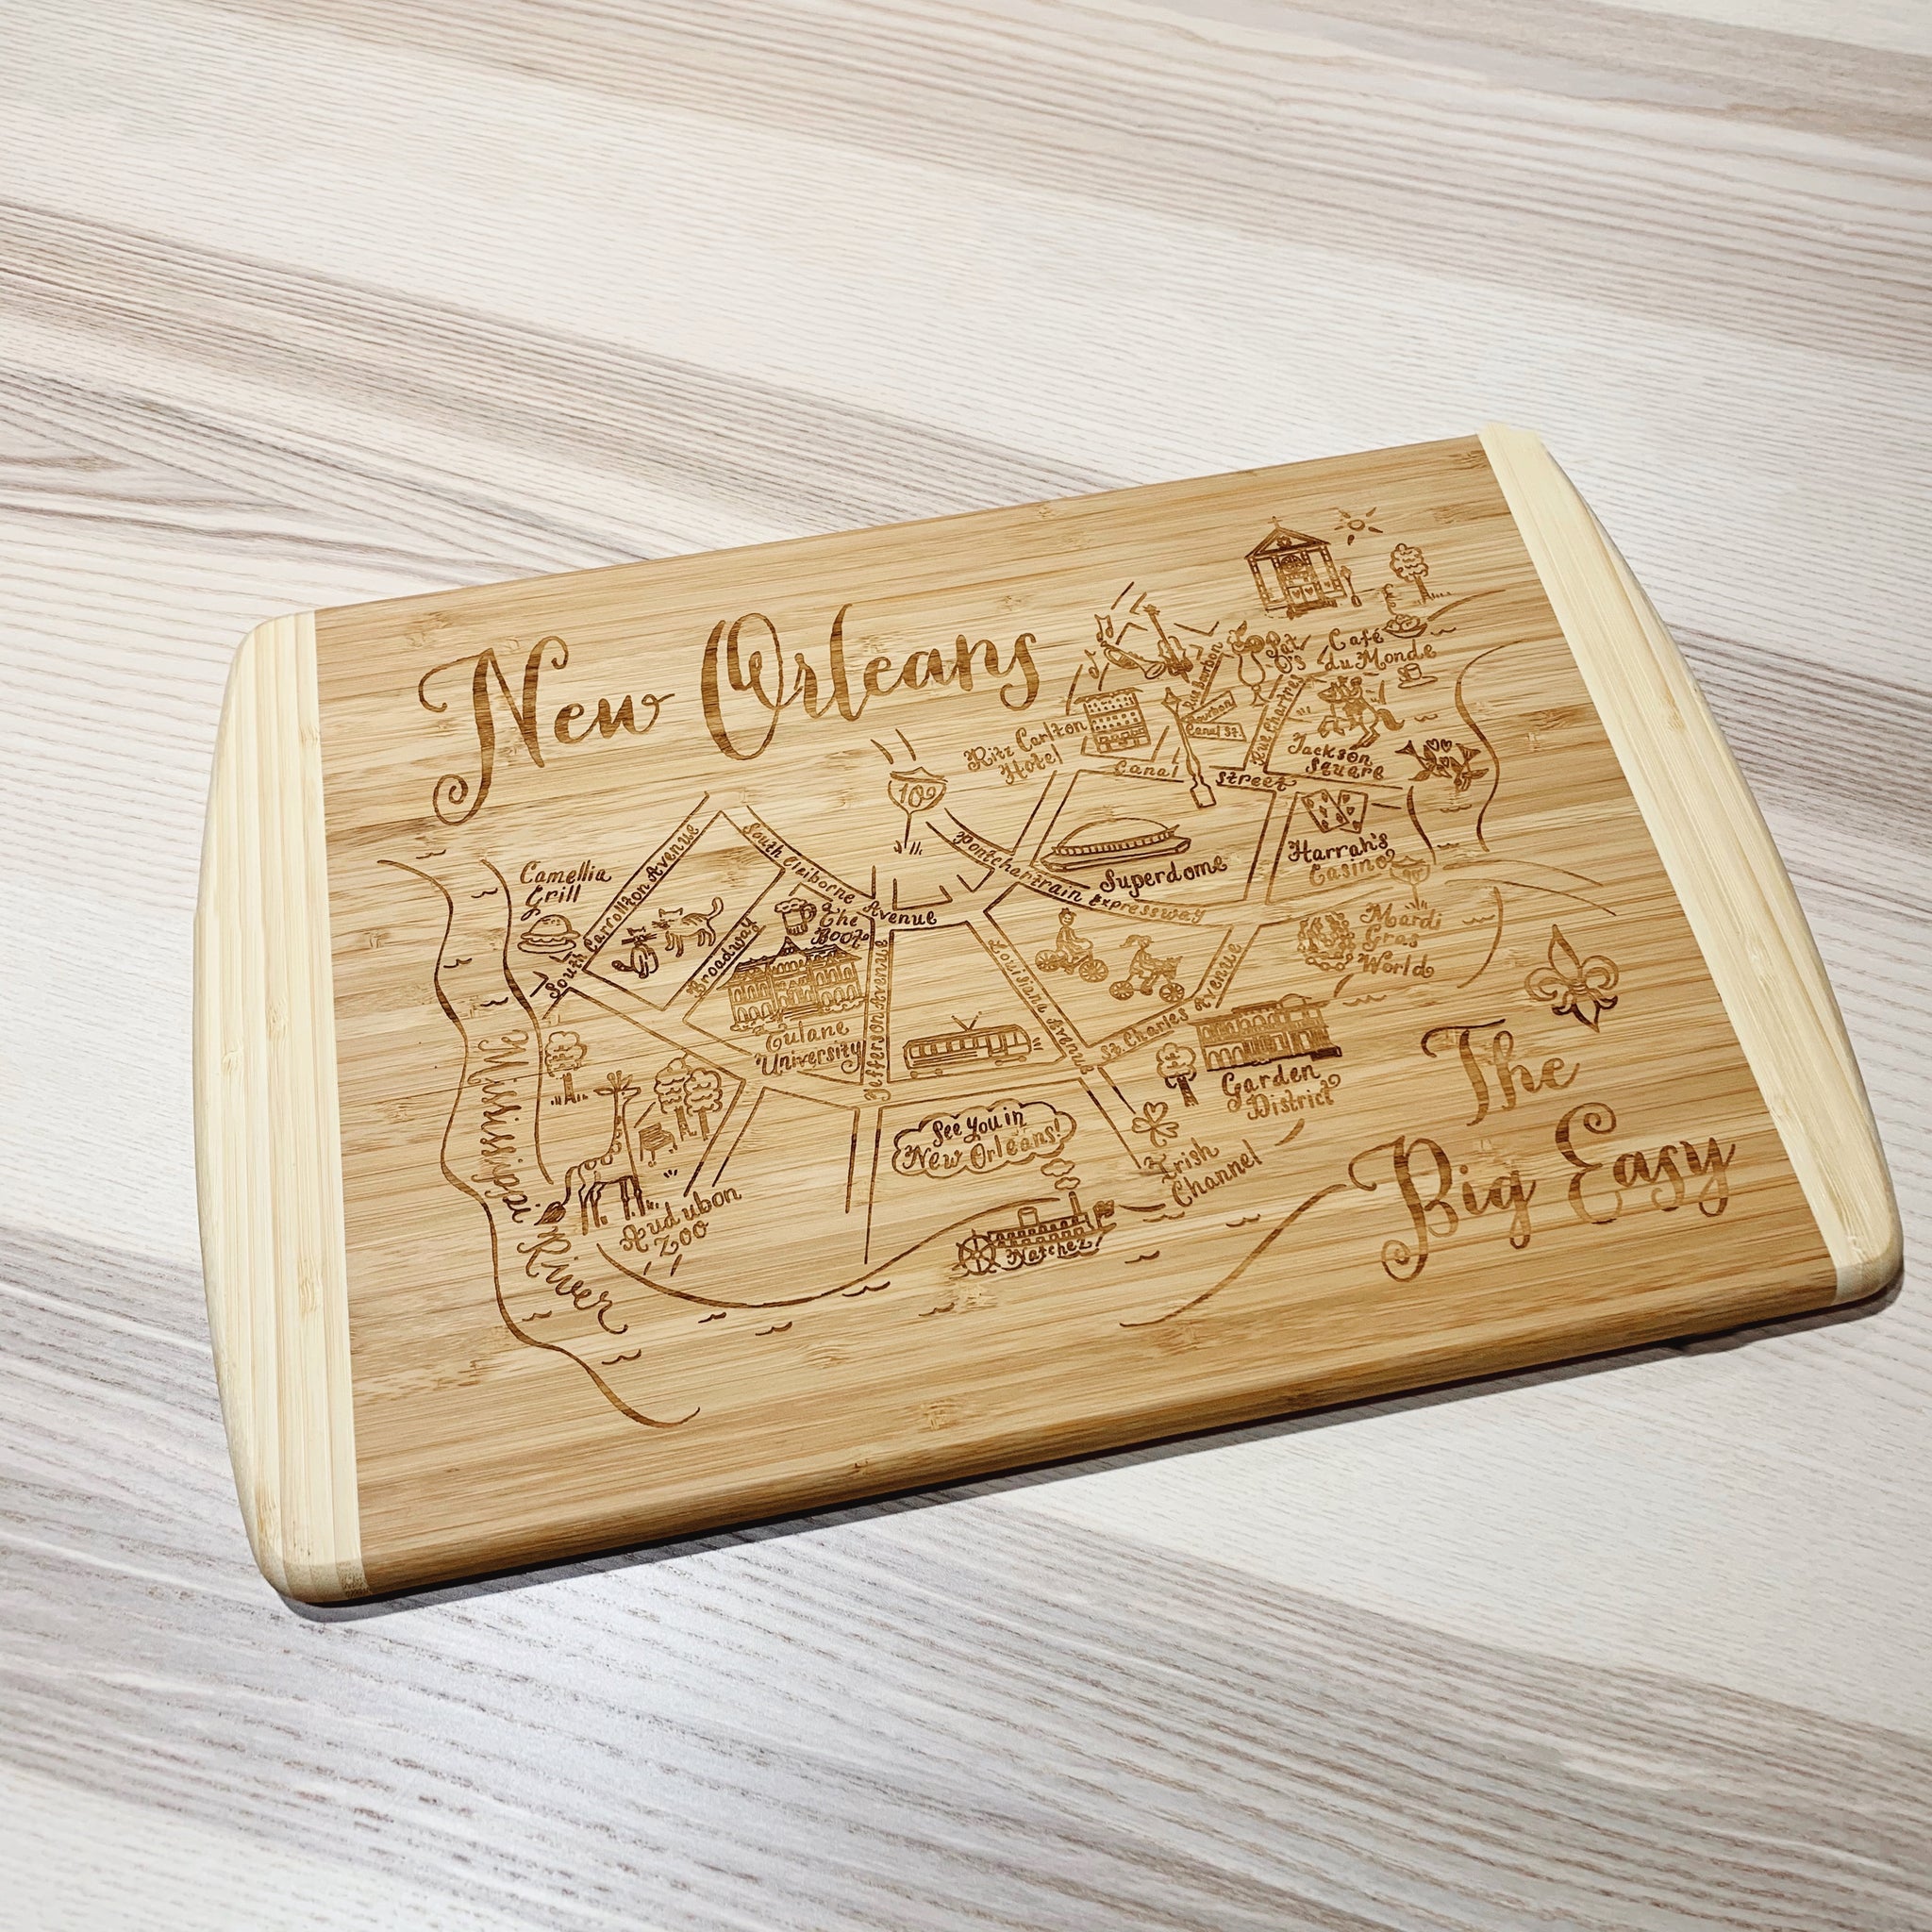 Glacier Bay Stonehaven 18 in x 12 in Rectangle Bamboo Cutting Board, Green